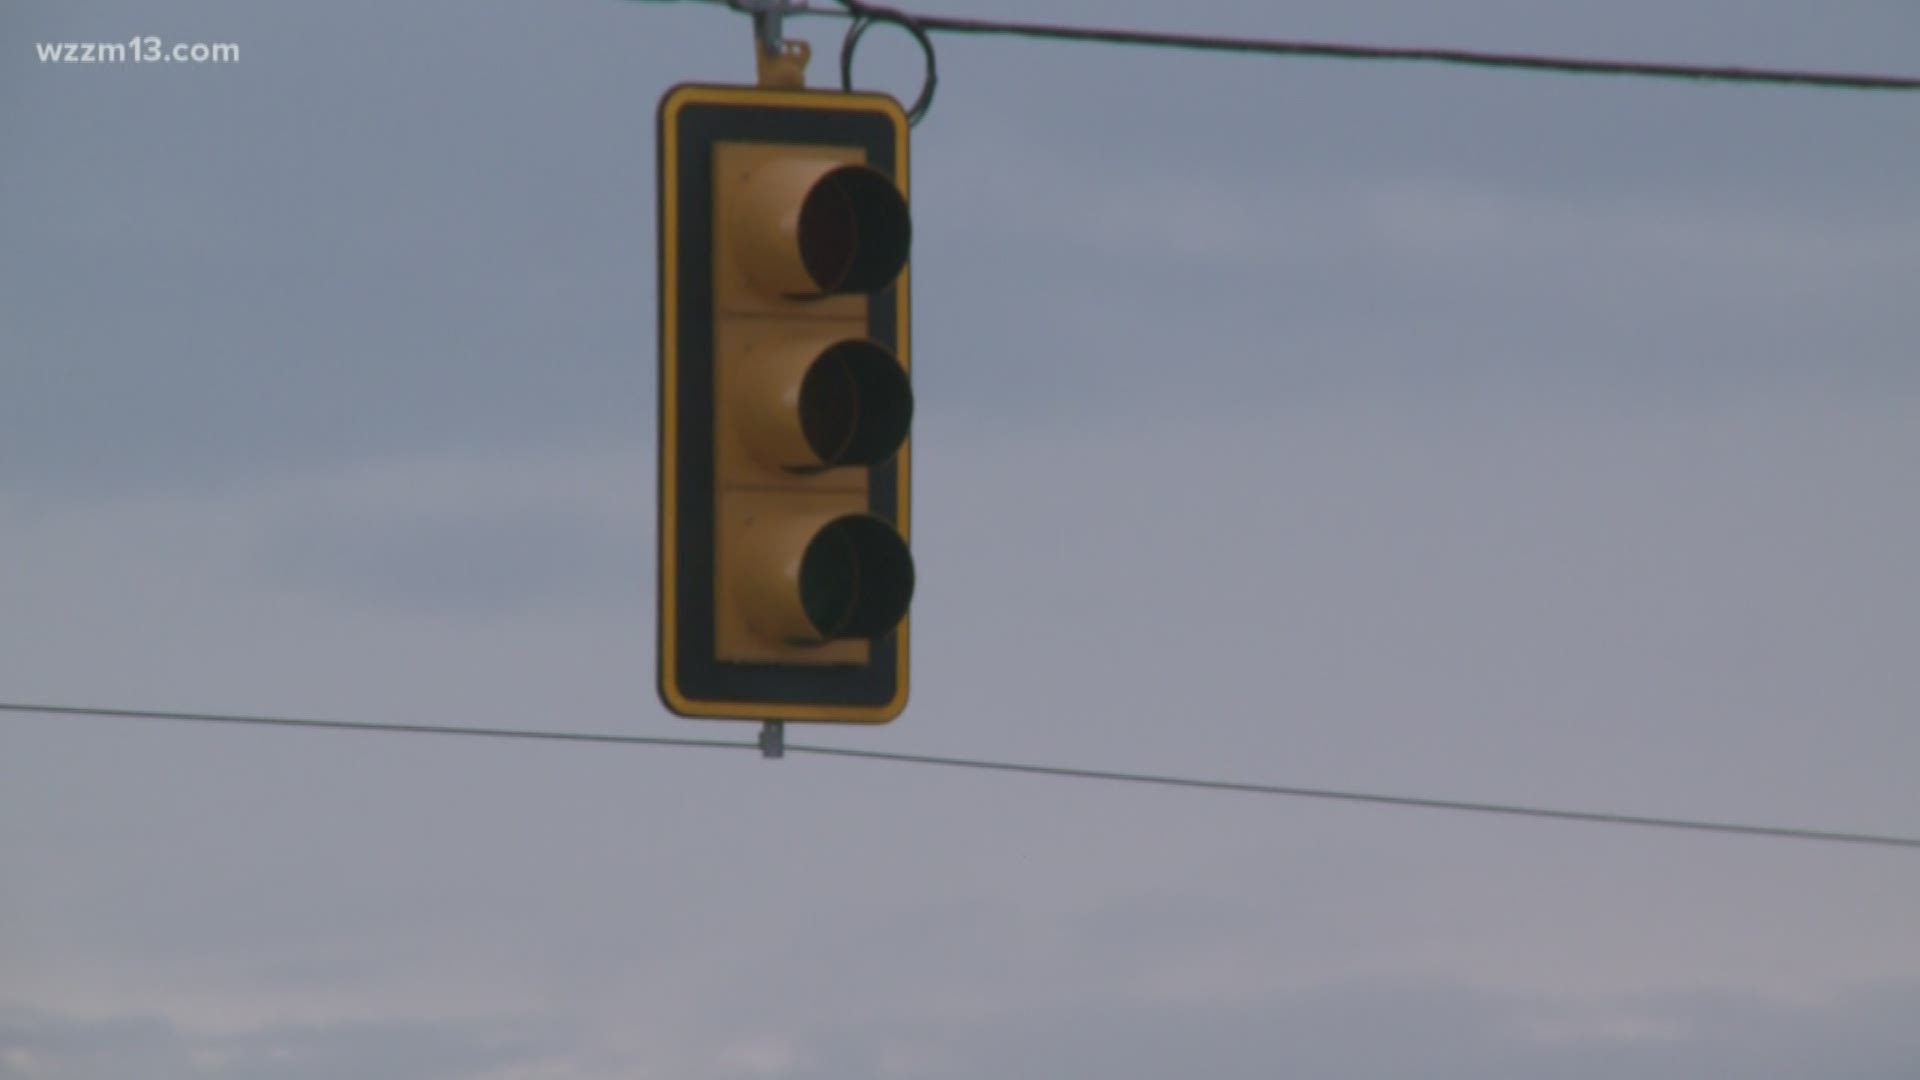 Power outages: What to do if a traffic light is out in Michigan